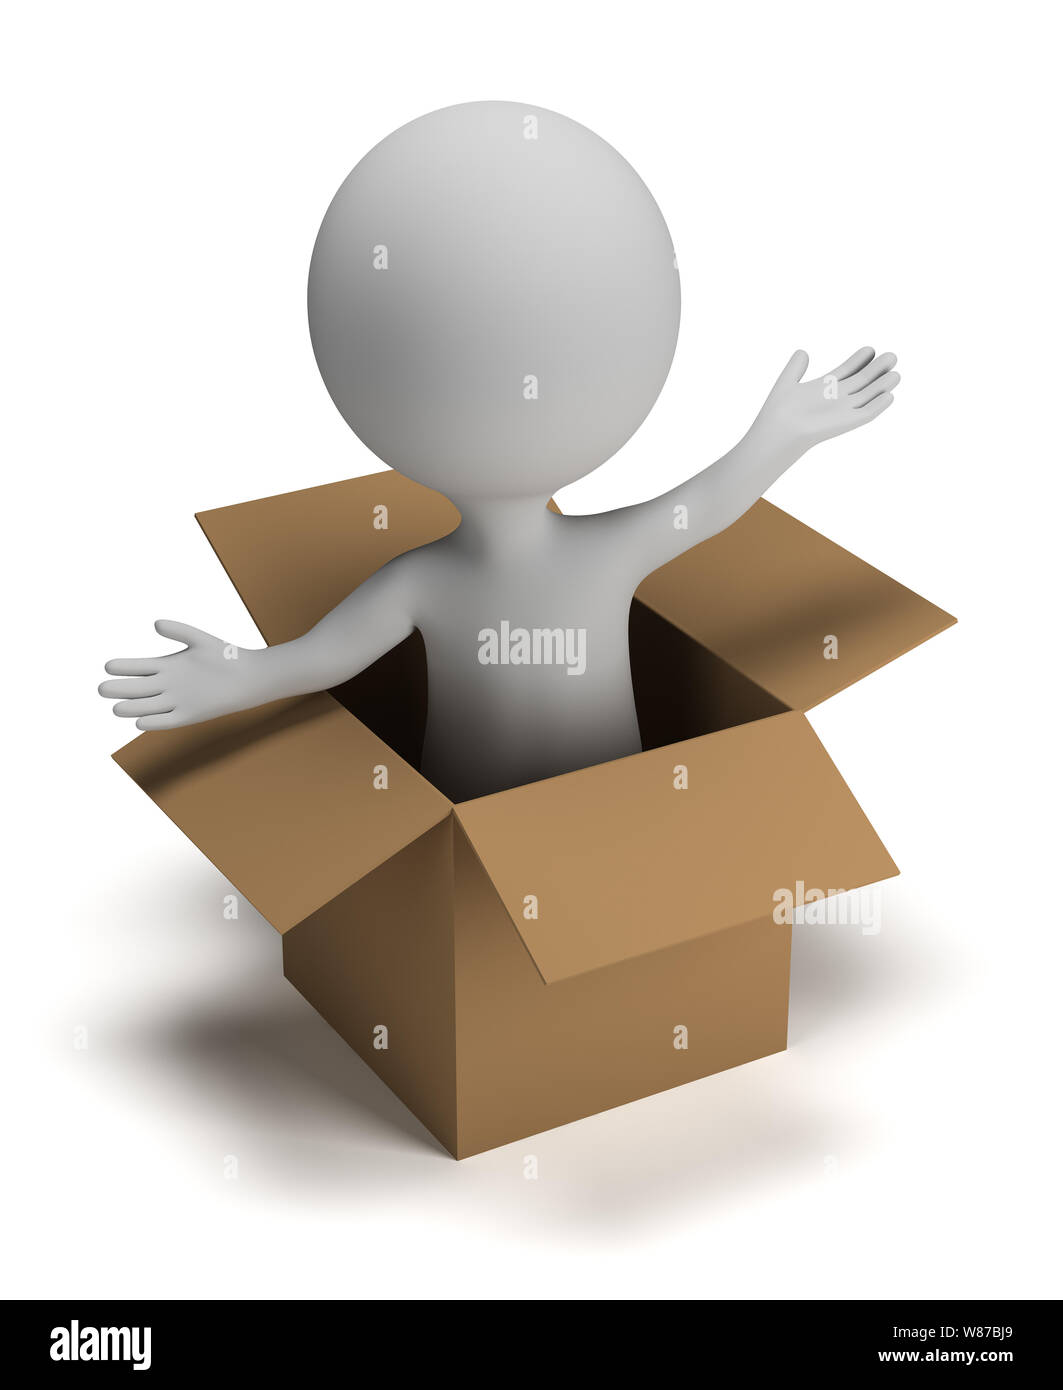 3d small person coming out of a box. 3d image. Isolated white background. Stock Photo